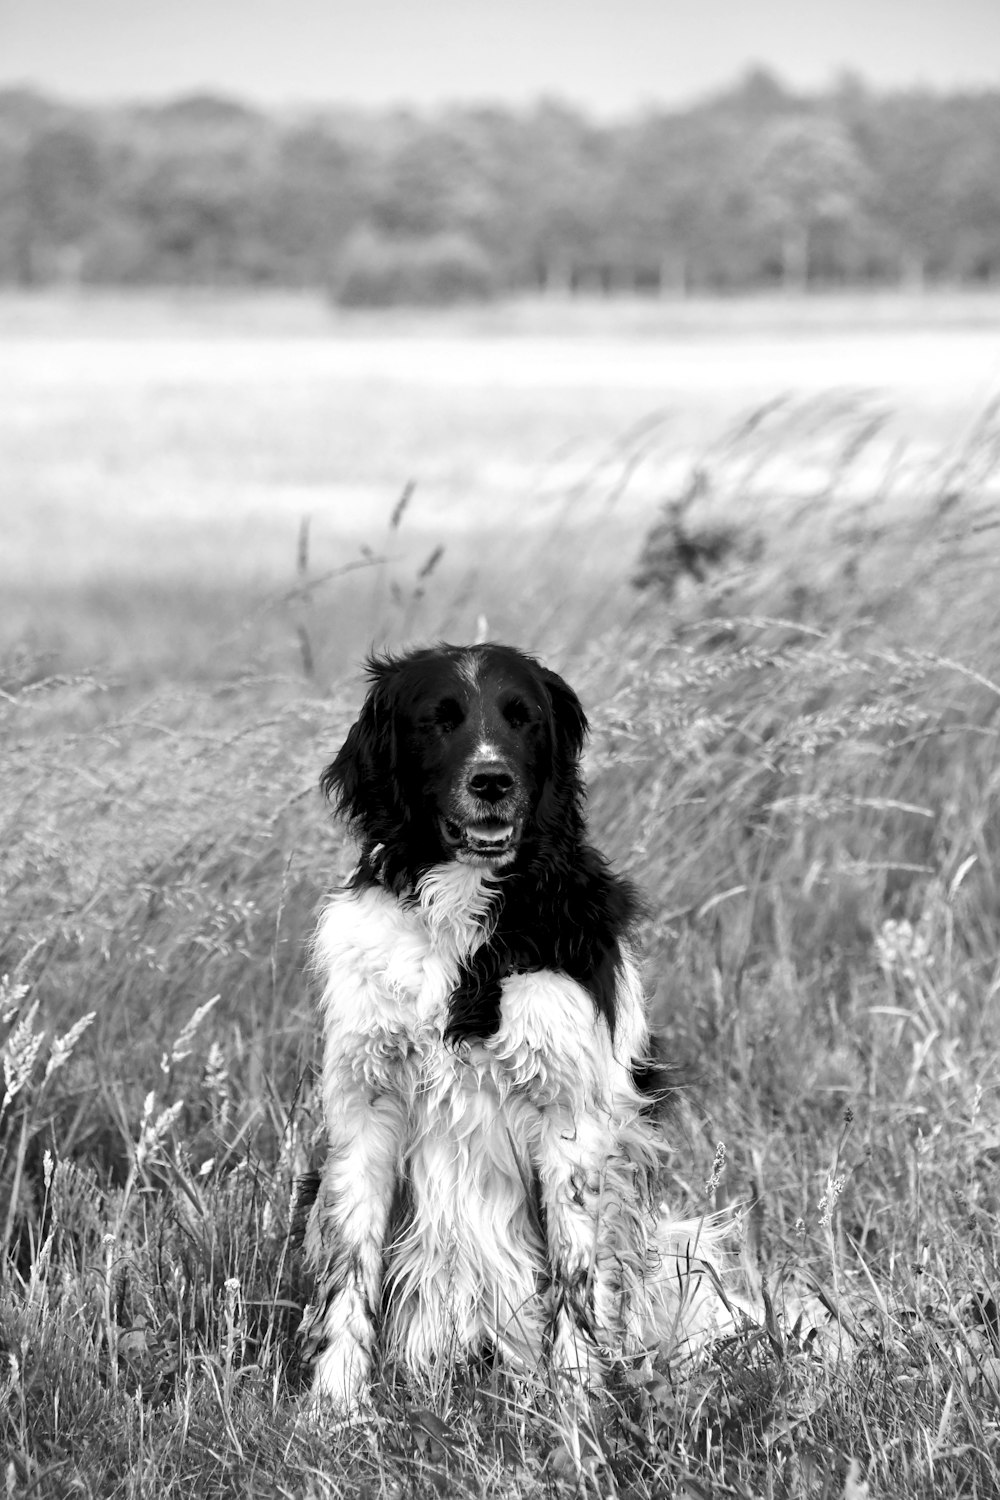 grayscale photo of long coated dog on grass field